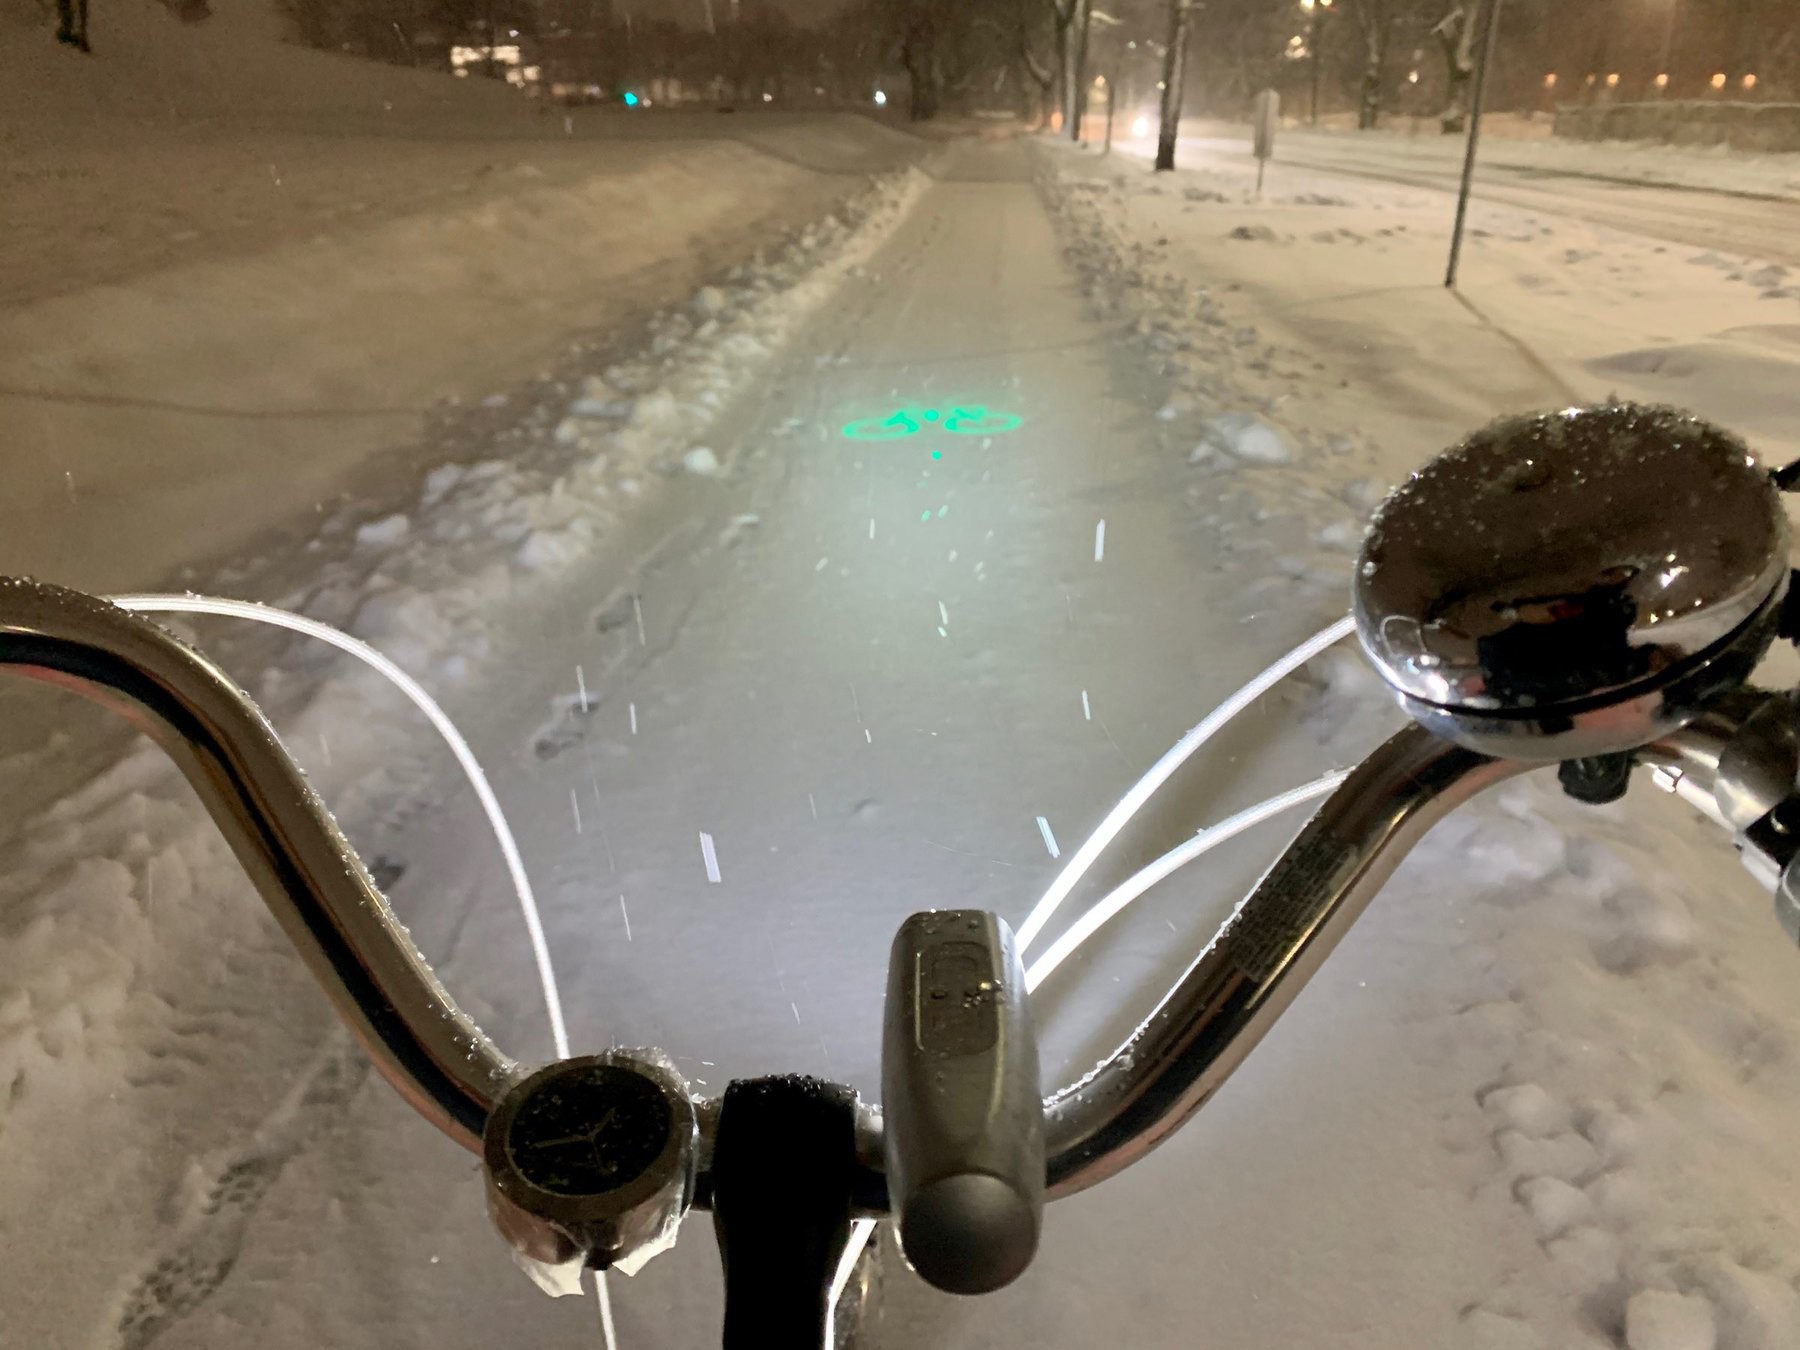 A snow-covered pathway framed by bicycle handlebars